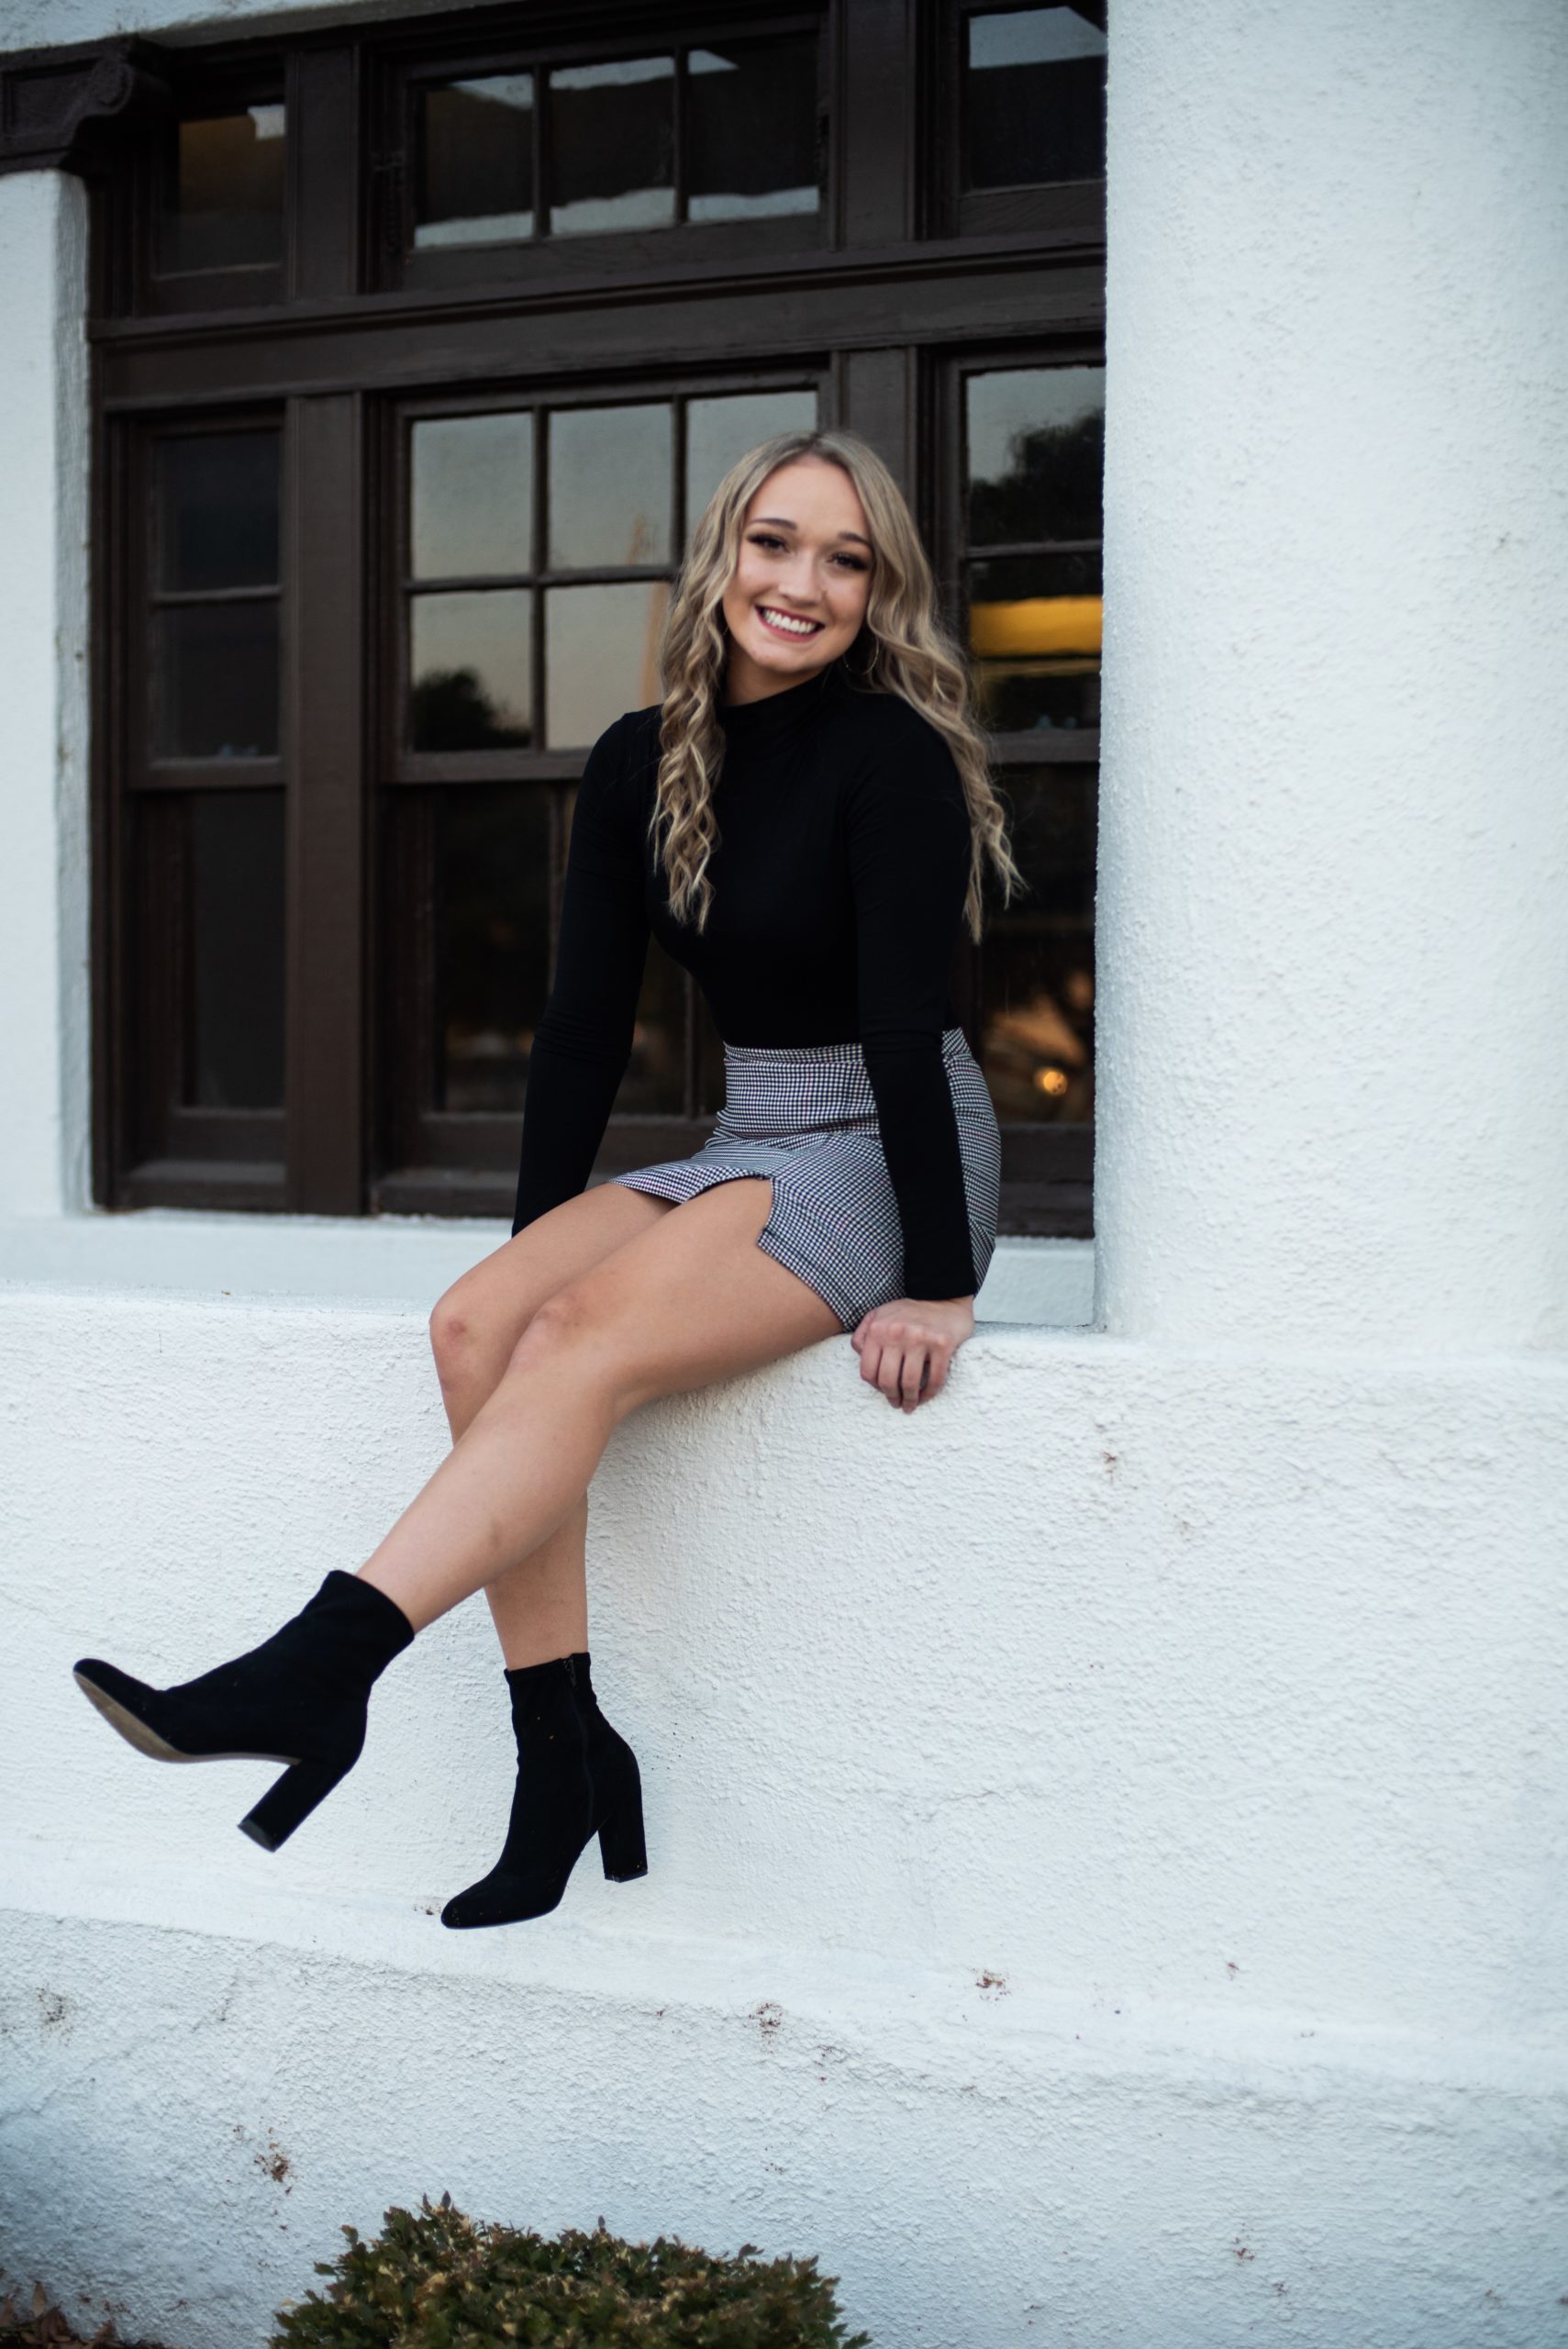 high school senior in black sweater and skirt with black booties sitting in window well senior pictures Kim Stiffler Photography